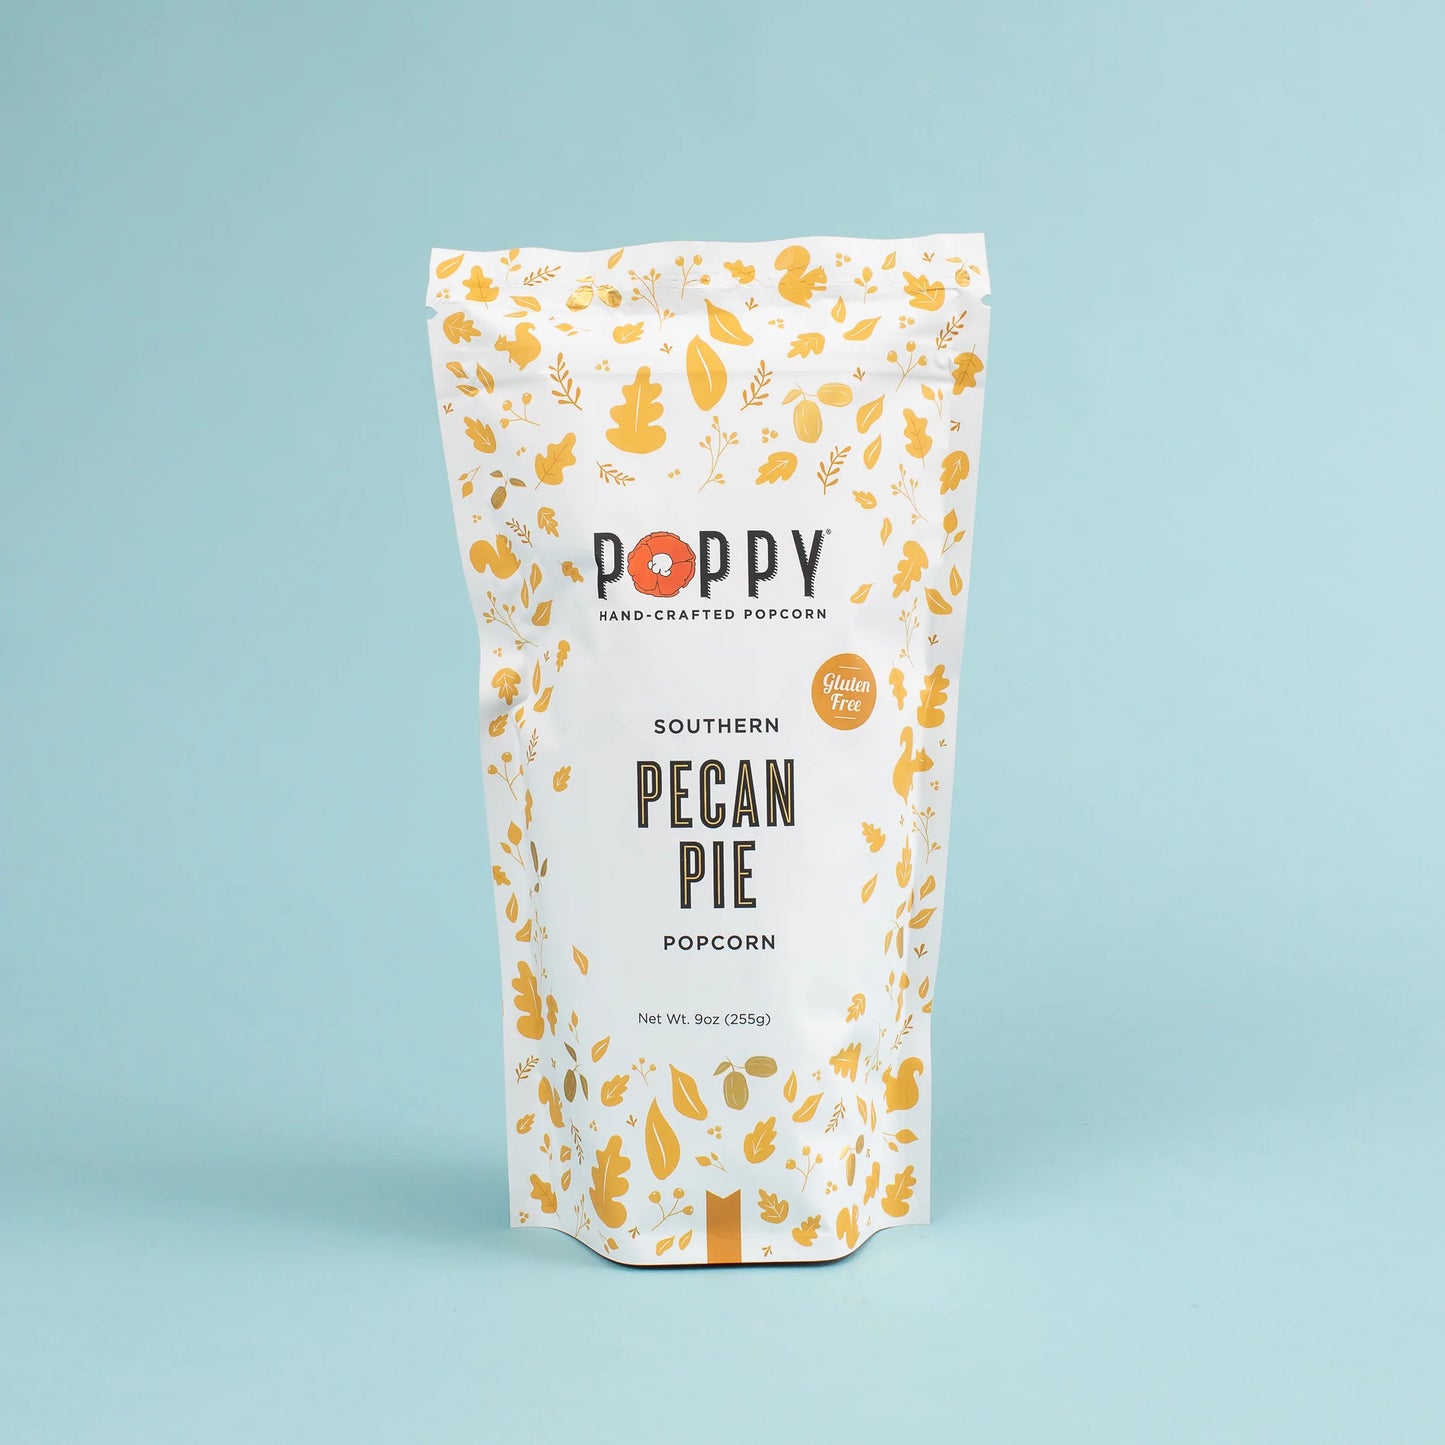 Poppy Handcrafted Popcorn Fall Flavors